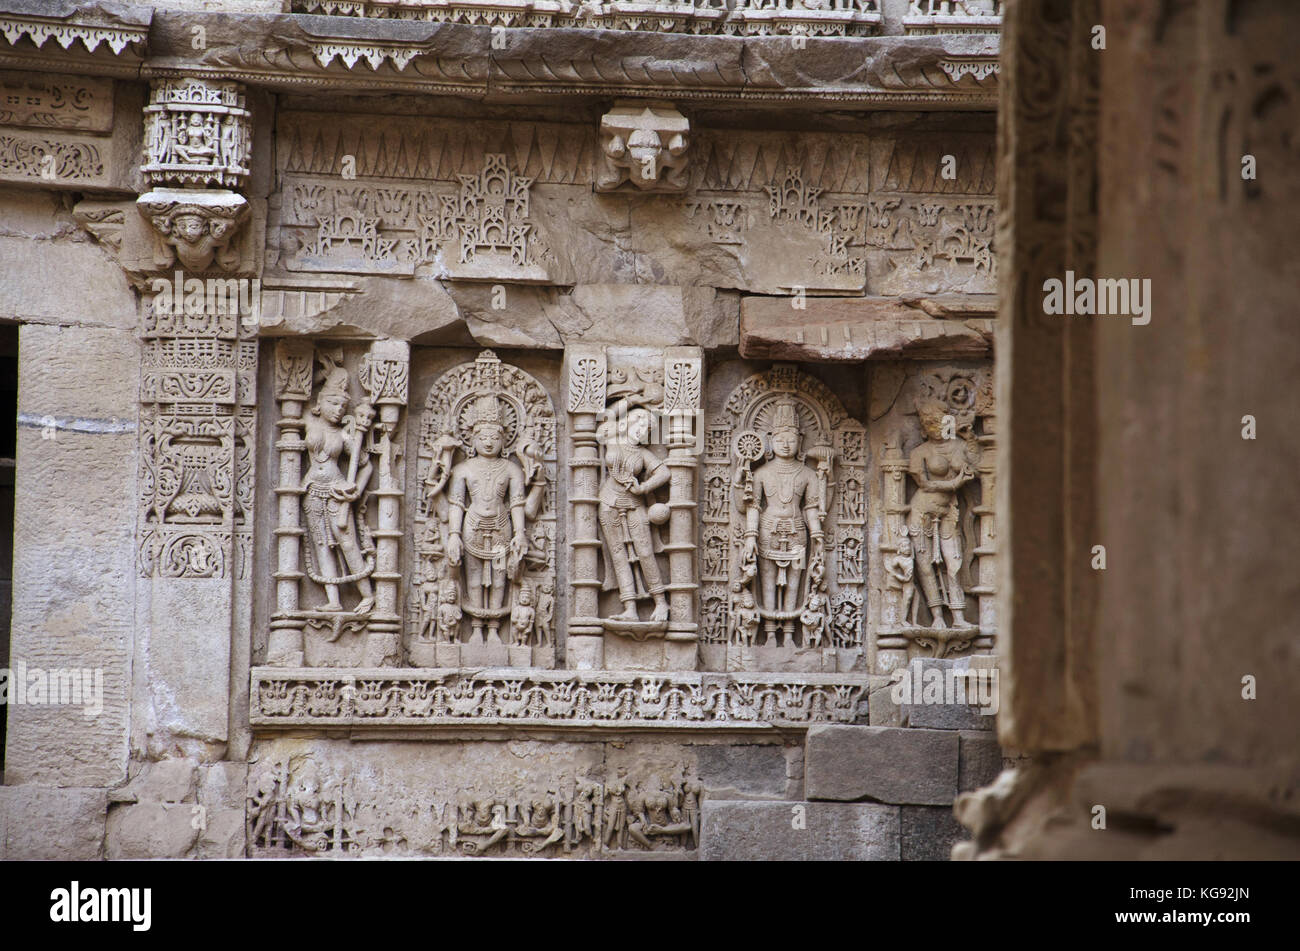 Carved idols on the inner wall and pillars of Rani ki vav, an intricately constructed stepwell on the banks of Saraswati River.  Patan, Gujarat, India Stock Photo